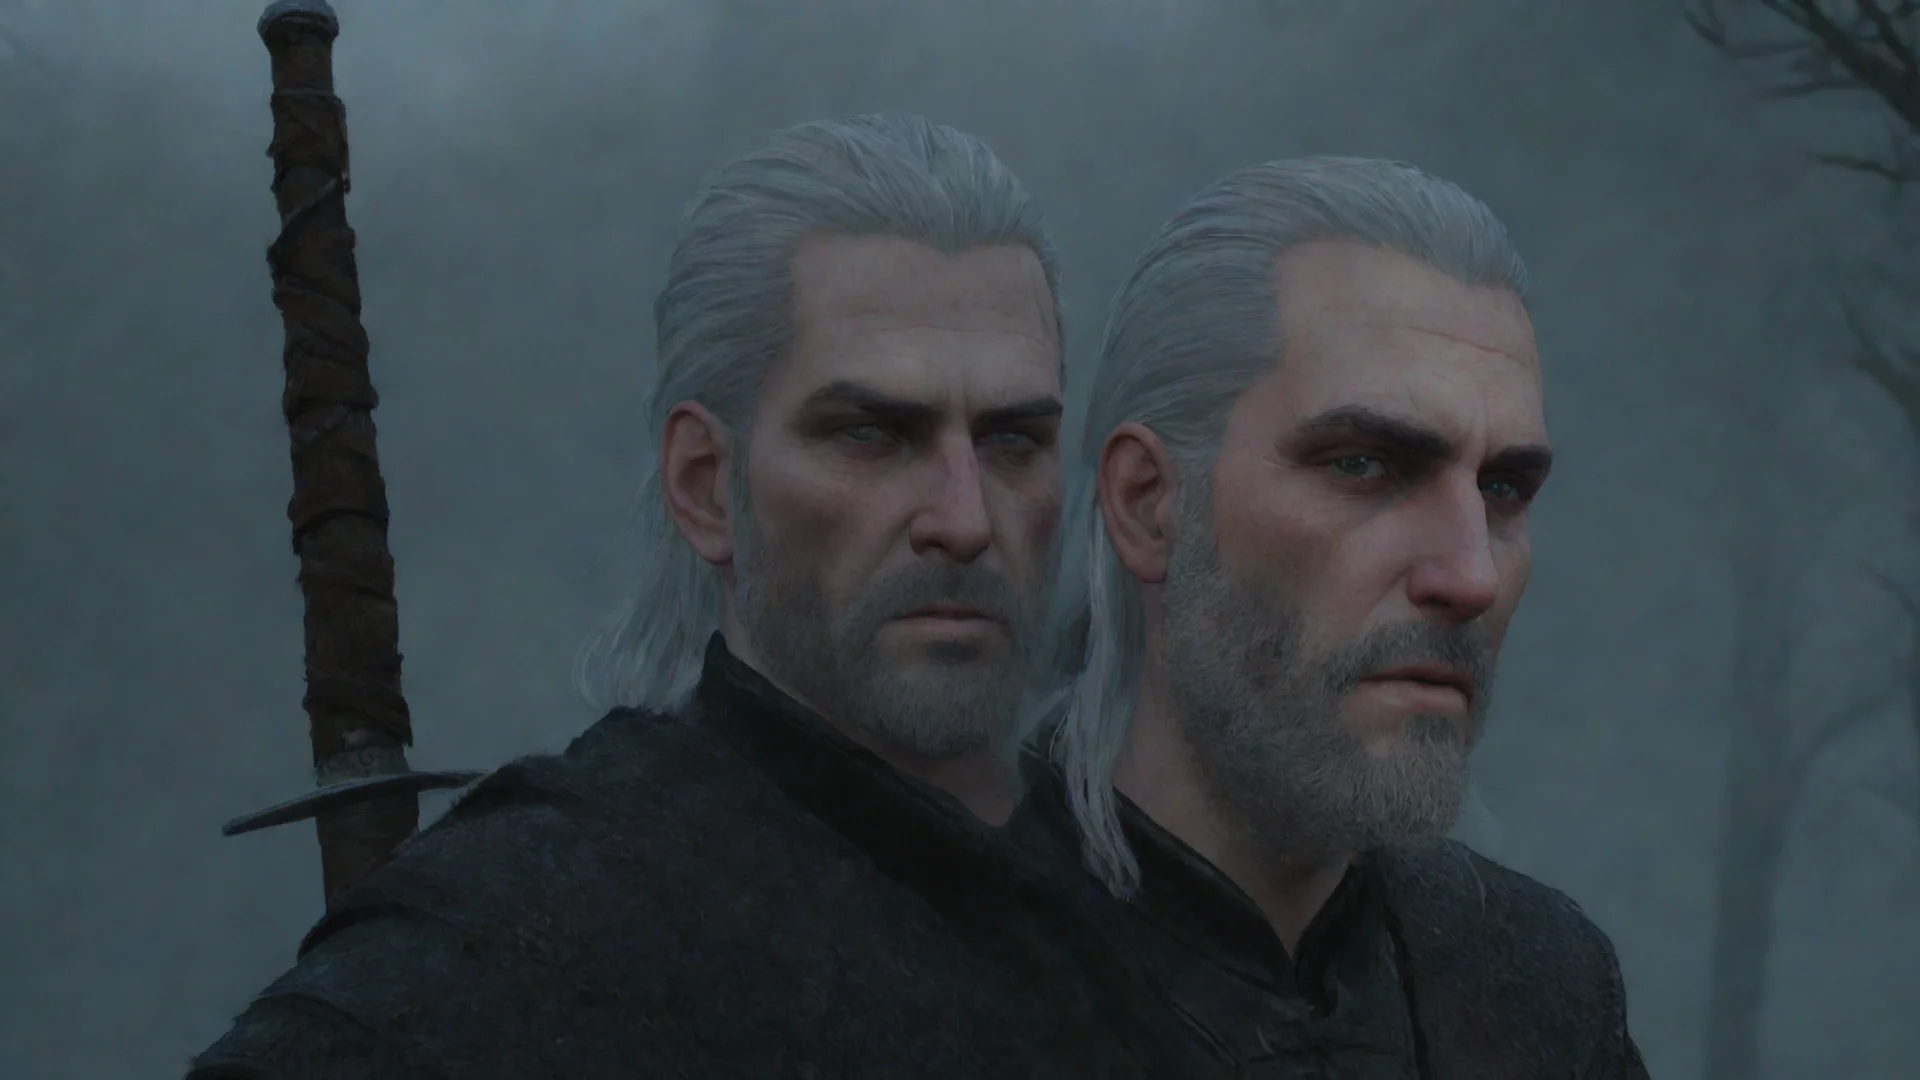 aiamazing geralt  awesome portrait 2 wide